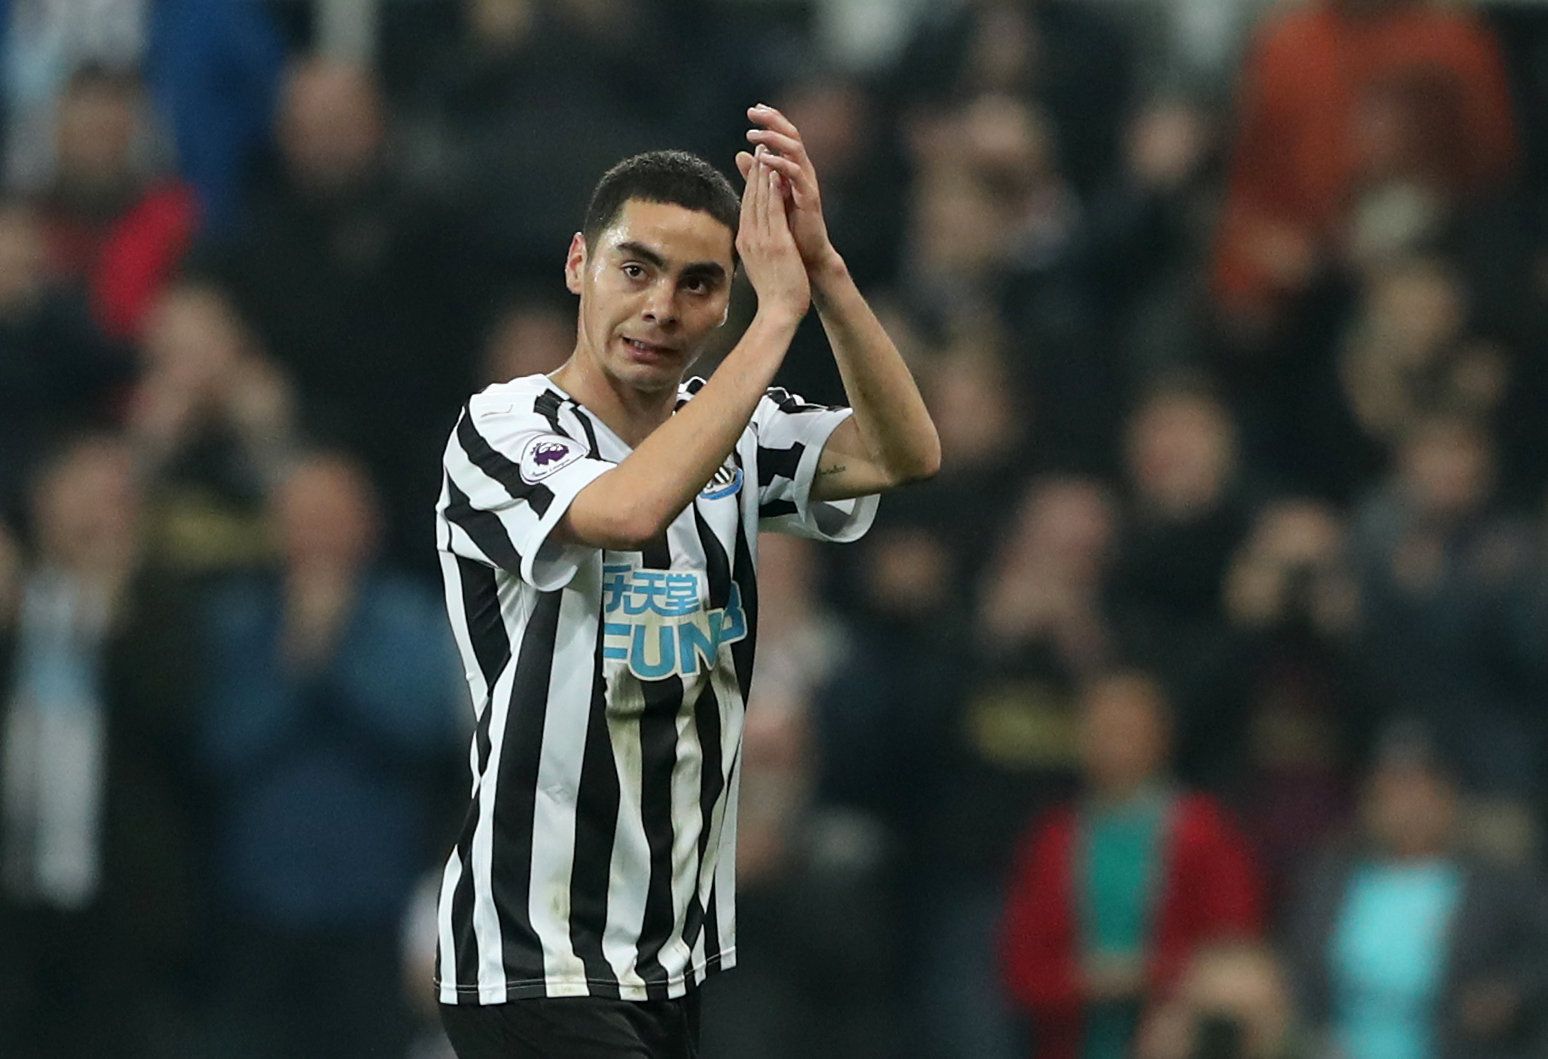 Soccer Football - Premier League - Newcastle United v Burnley - St James' Park, Newcastle, Britain - February 26, 2019  Newcastle United's Miguel Almiron applauds fans as he is substituted off                 REUTERS/Scott Heppell  EDITORIAL USE ONLY. No use with unauthorized audio, video, data, fixture lists, club/league logos or "live" services. Online in-match use limited to 75 images, no video emulation. No use in betting, games or single club/league/player publications.  Please contact your